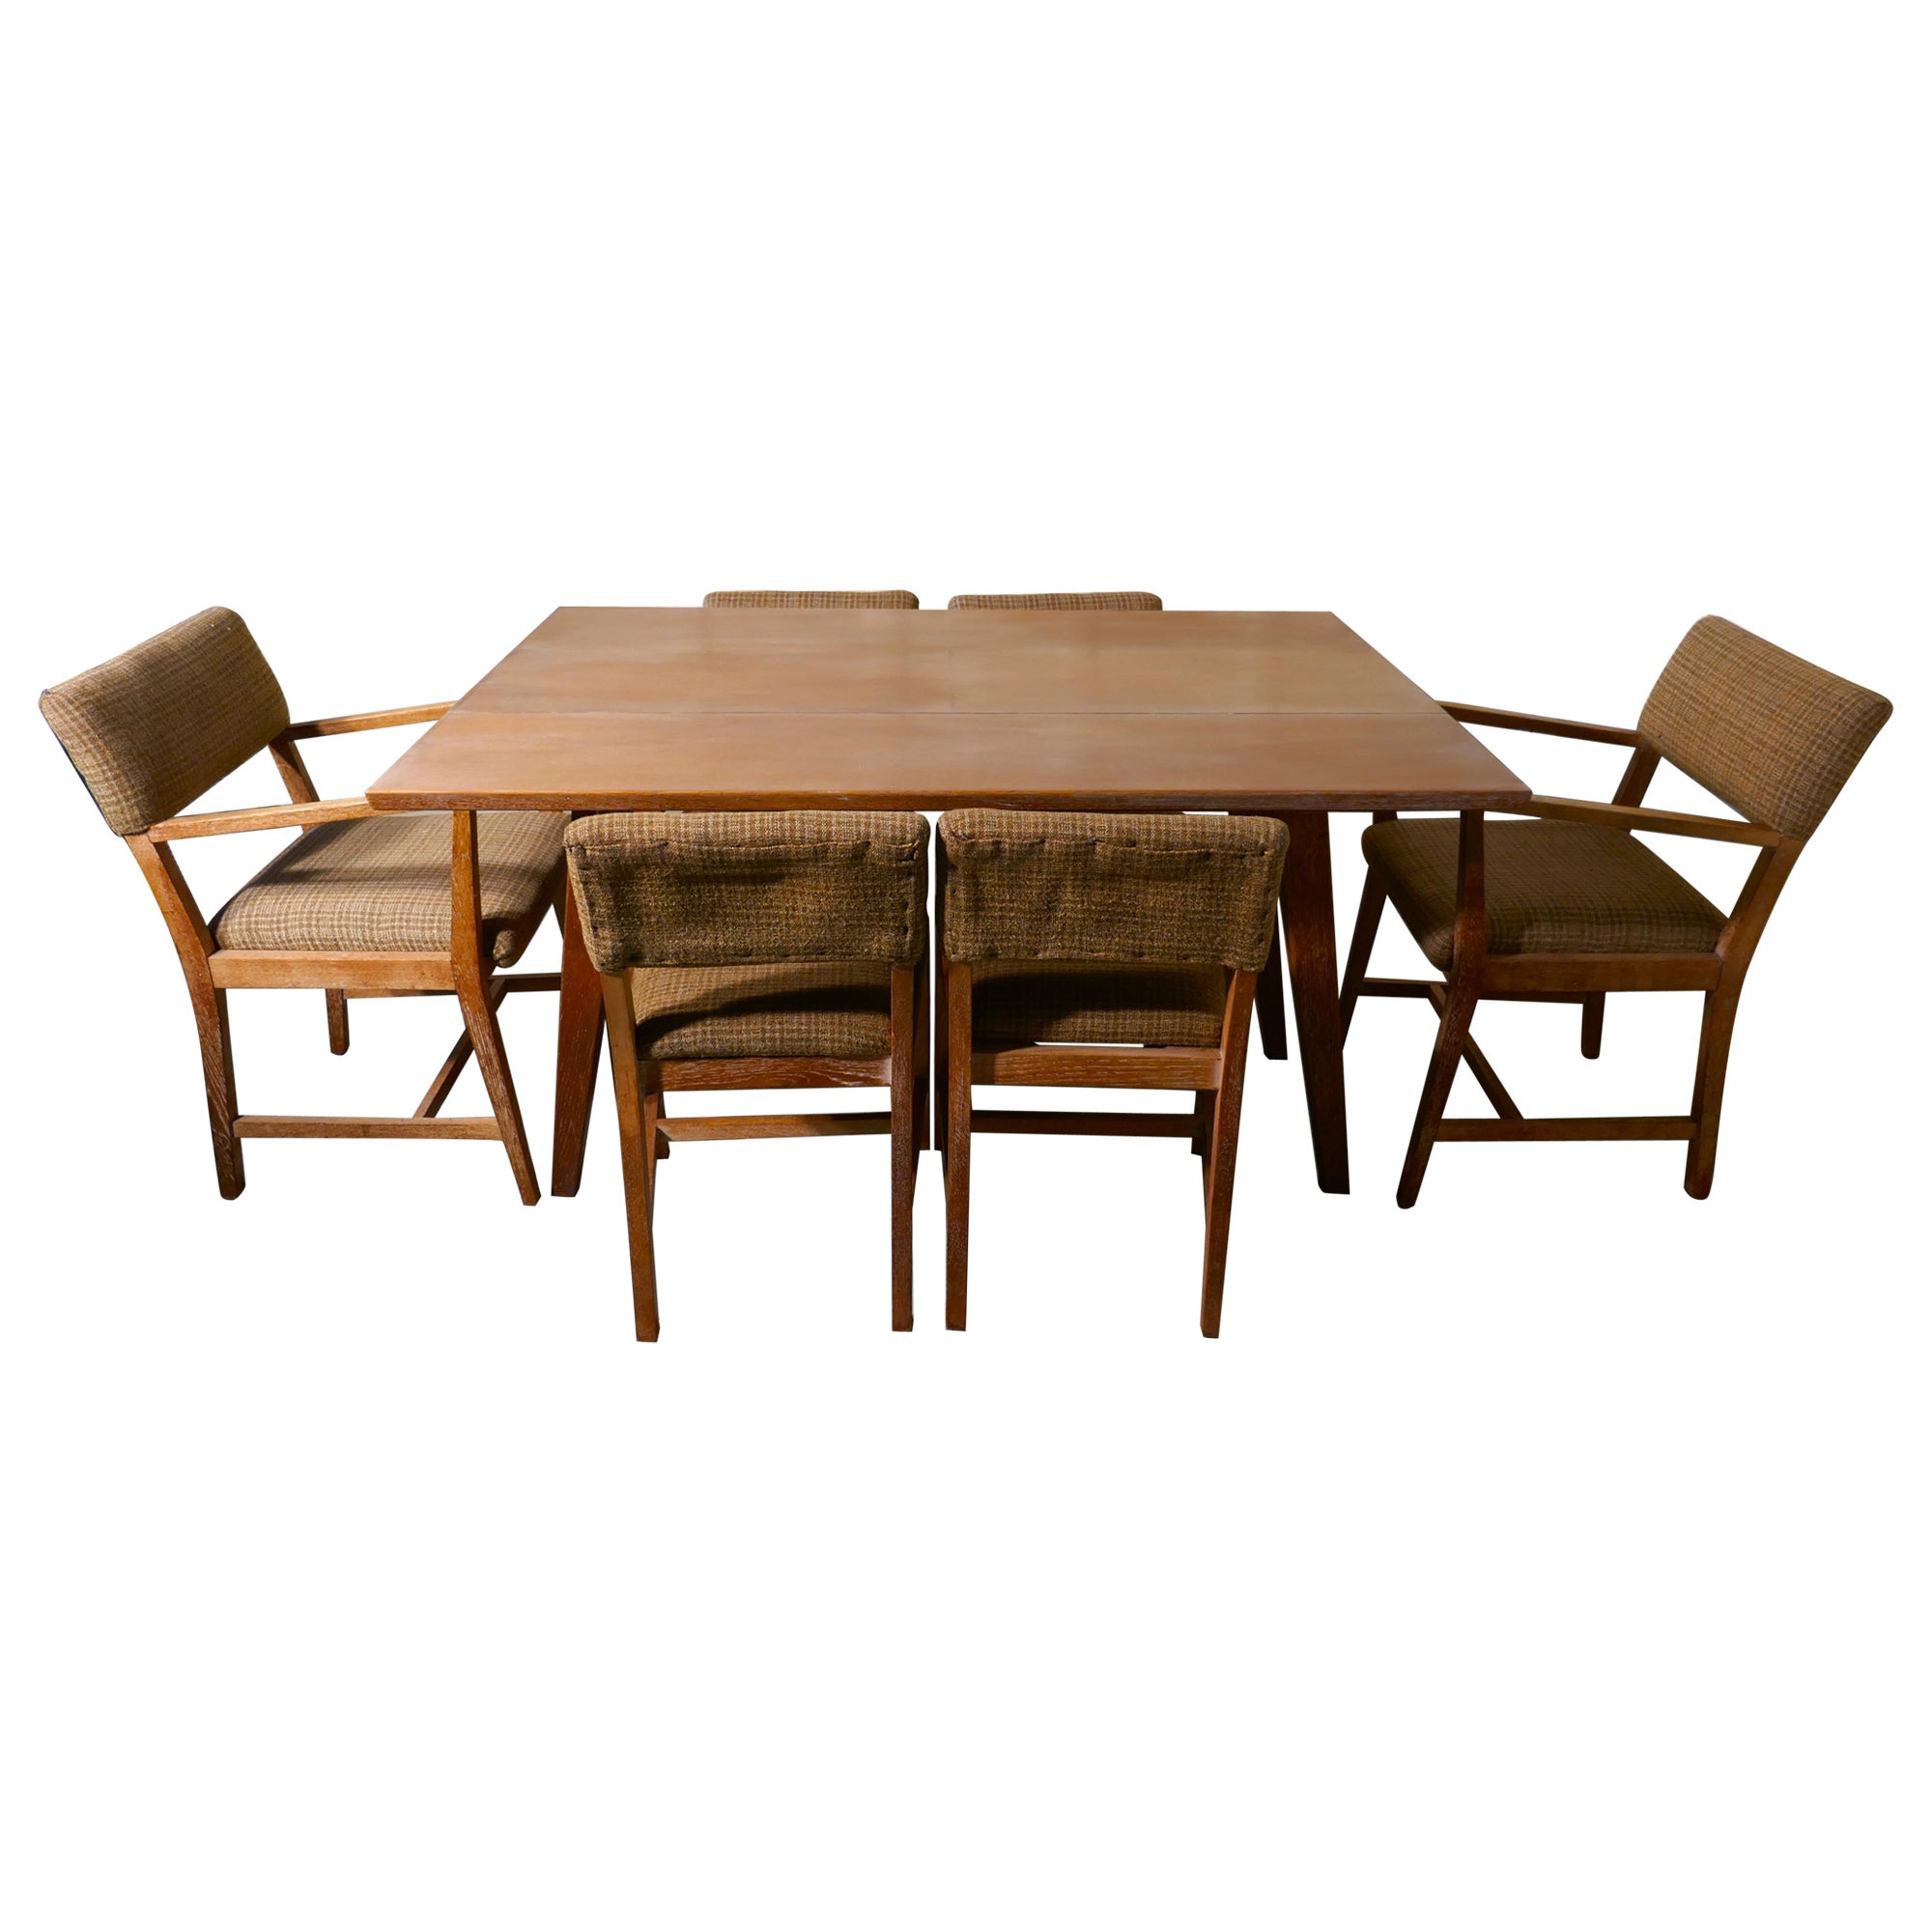 Limed Oak Extending Dining Table and set of 6 Chairs  